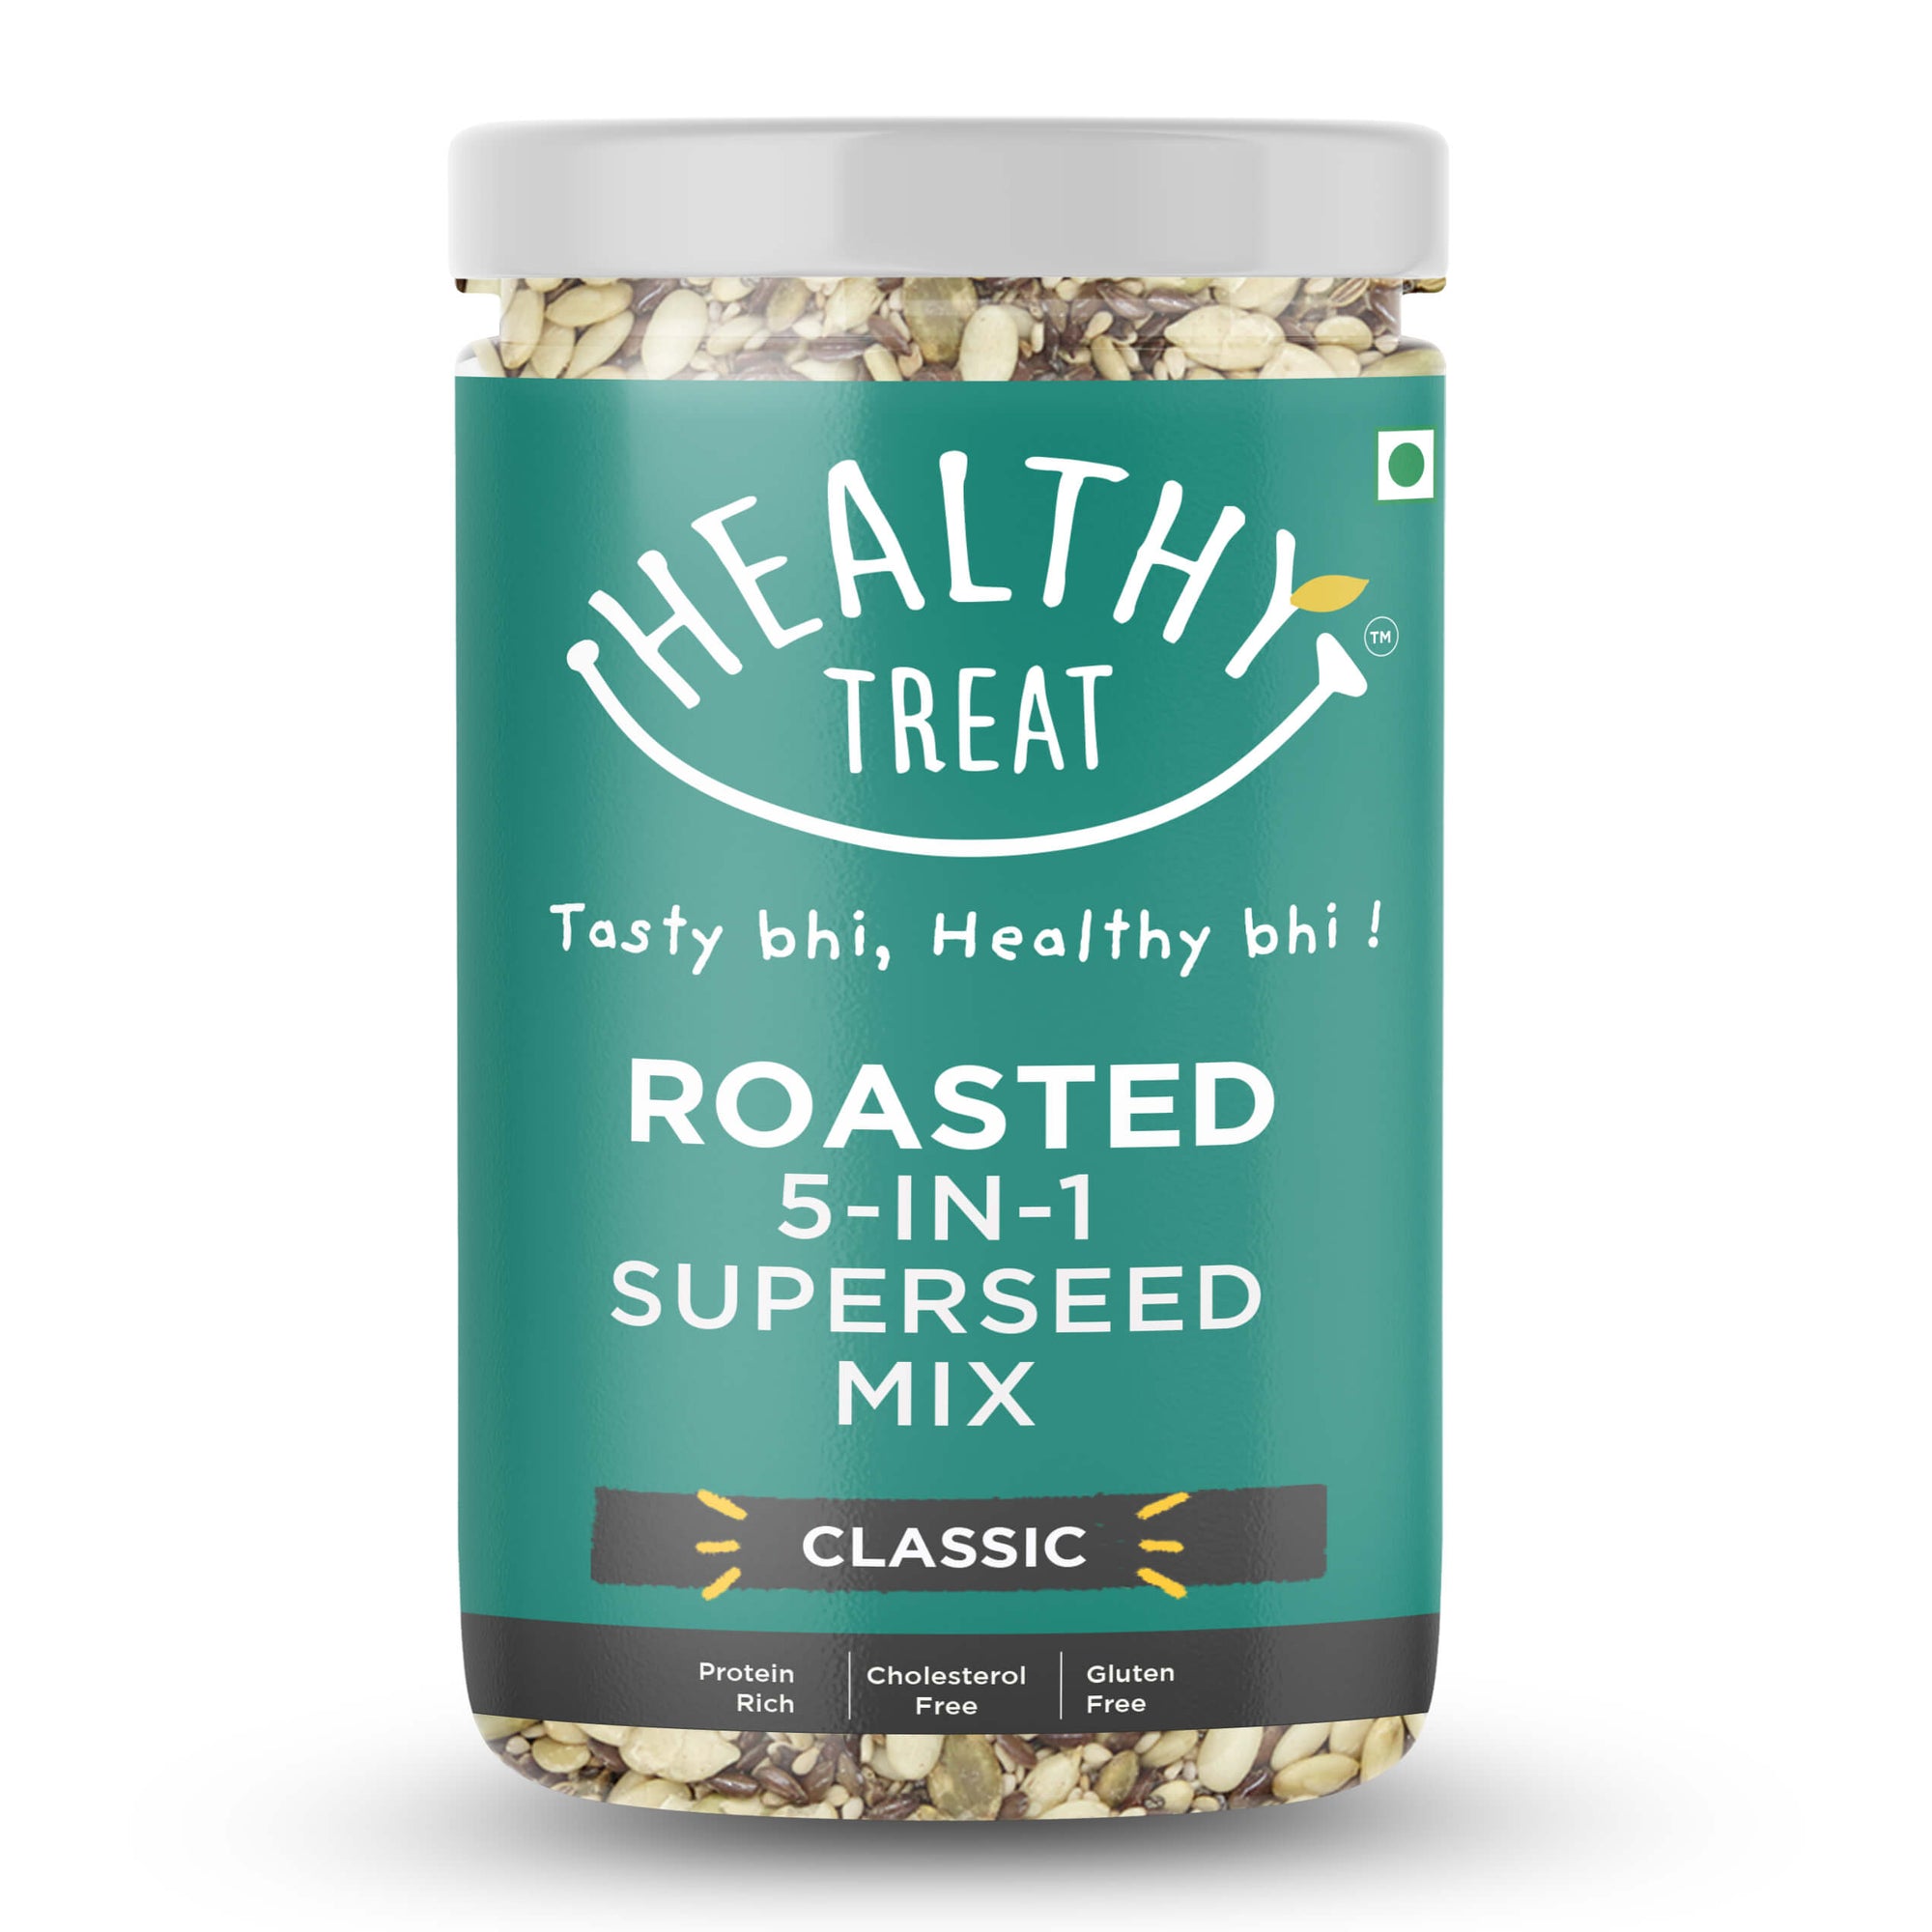 Healthy Treat Roasted 5 in 1 Superseed mix or mixed seeds classic is protein rich and full of nutrients. It's a blend of roasted watermelon seeds, flax seeds, sesame seeds, chia seeds and pumpkin seeds.